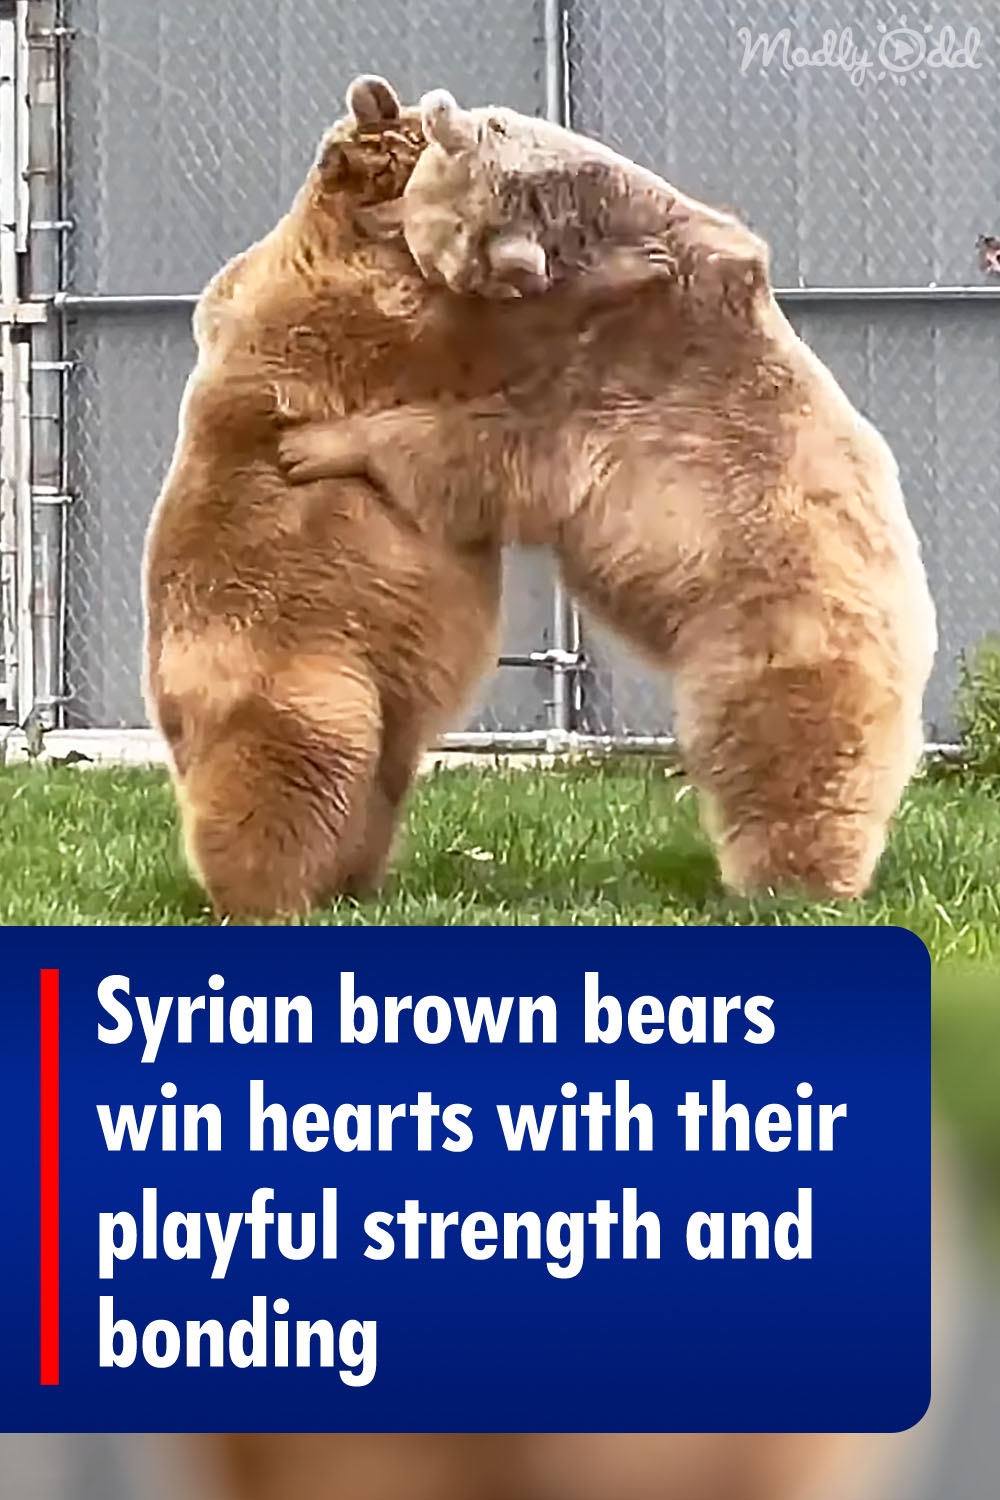 Syrian brown bears win hearts with their playful strength and bonding